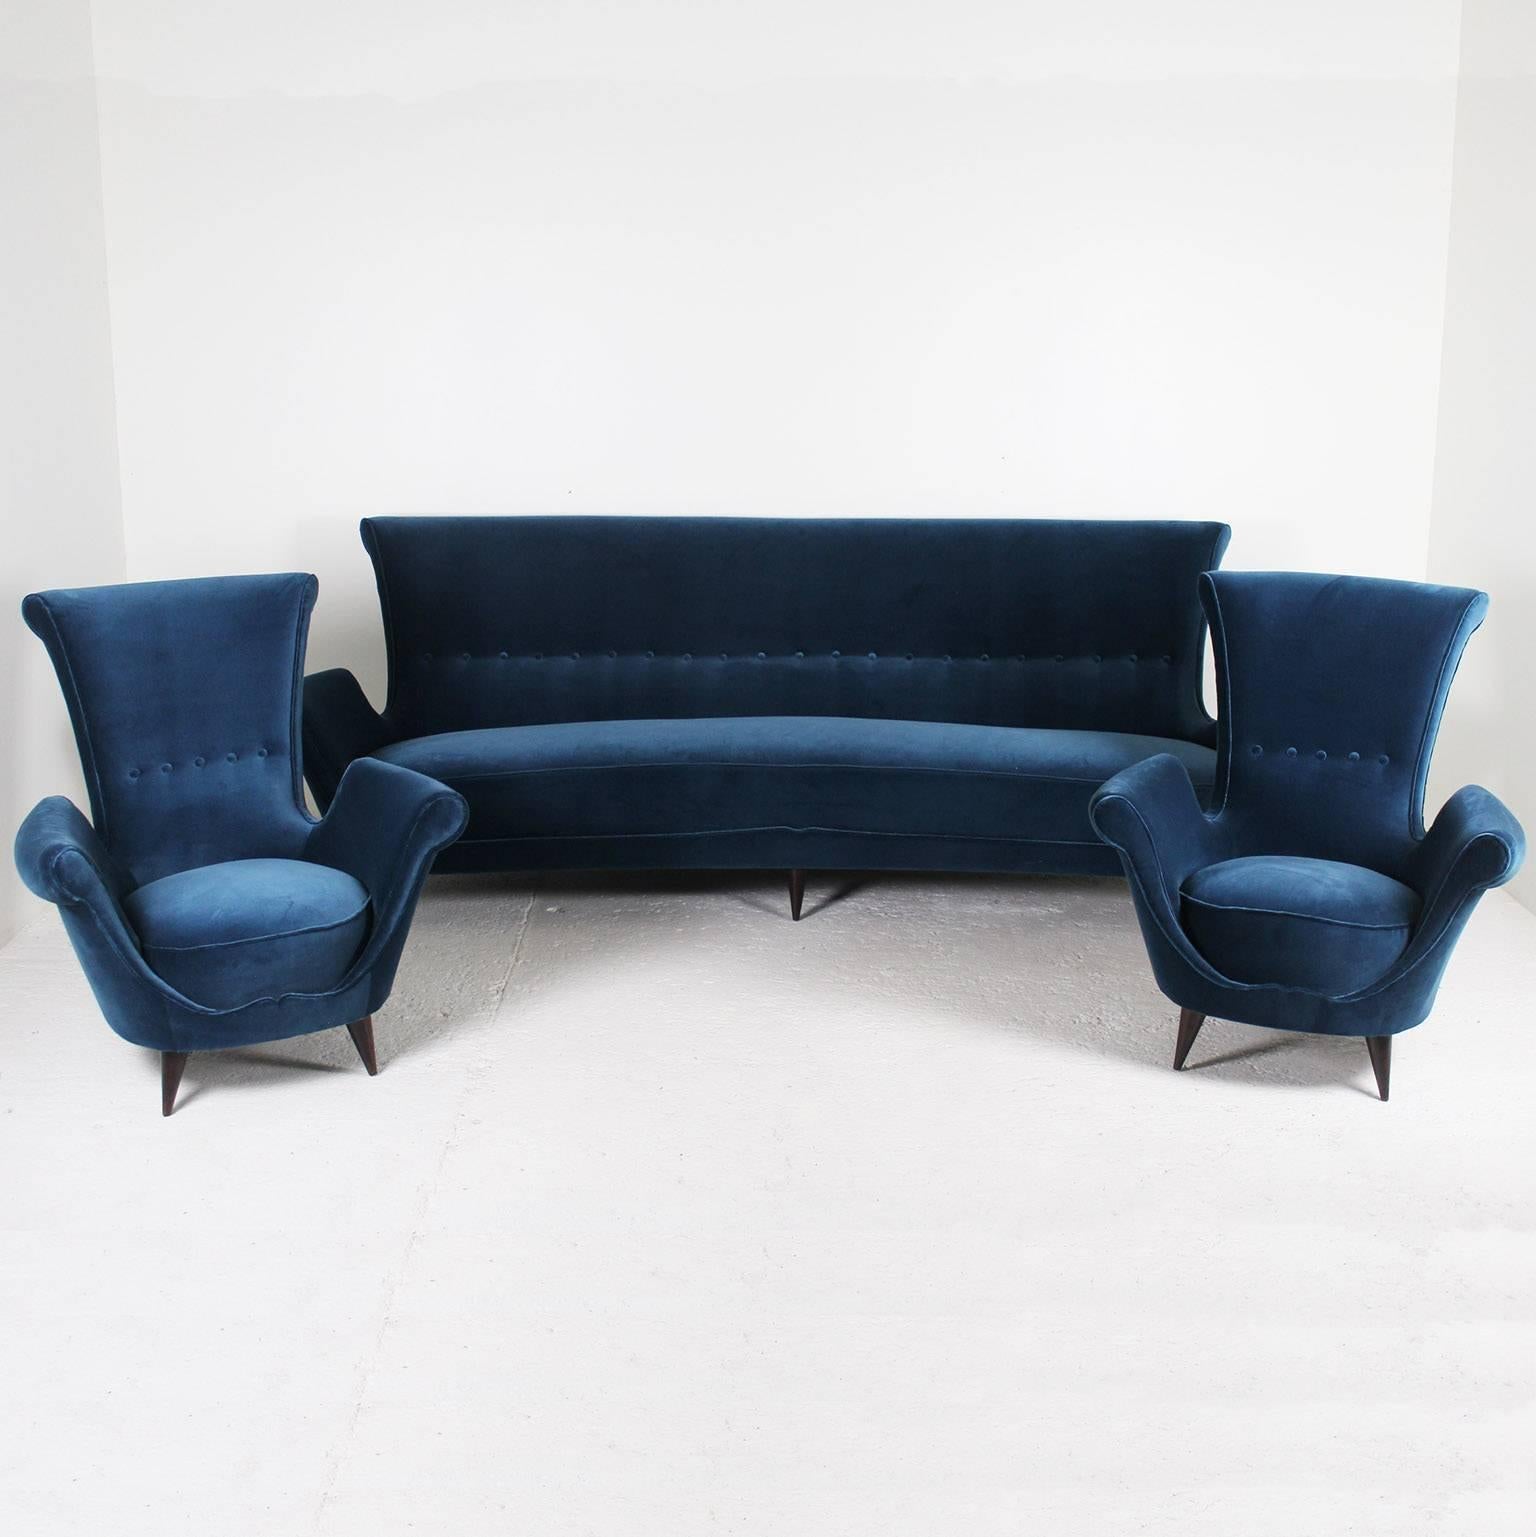 Splendid 1950s sofa and pair of armchairs, newly reupholstered in a blue velvet fabric by Maison Elitis, hand-stitched piping. The armchairs dimensions are:
Depth 80 cm, width 82 cm, height 90 cm, seat height 42 cm.